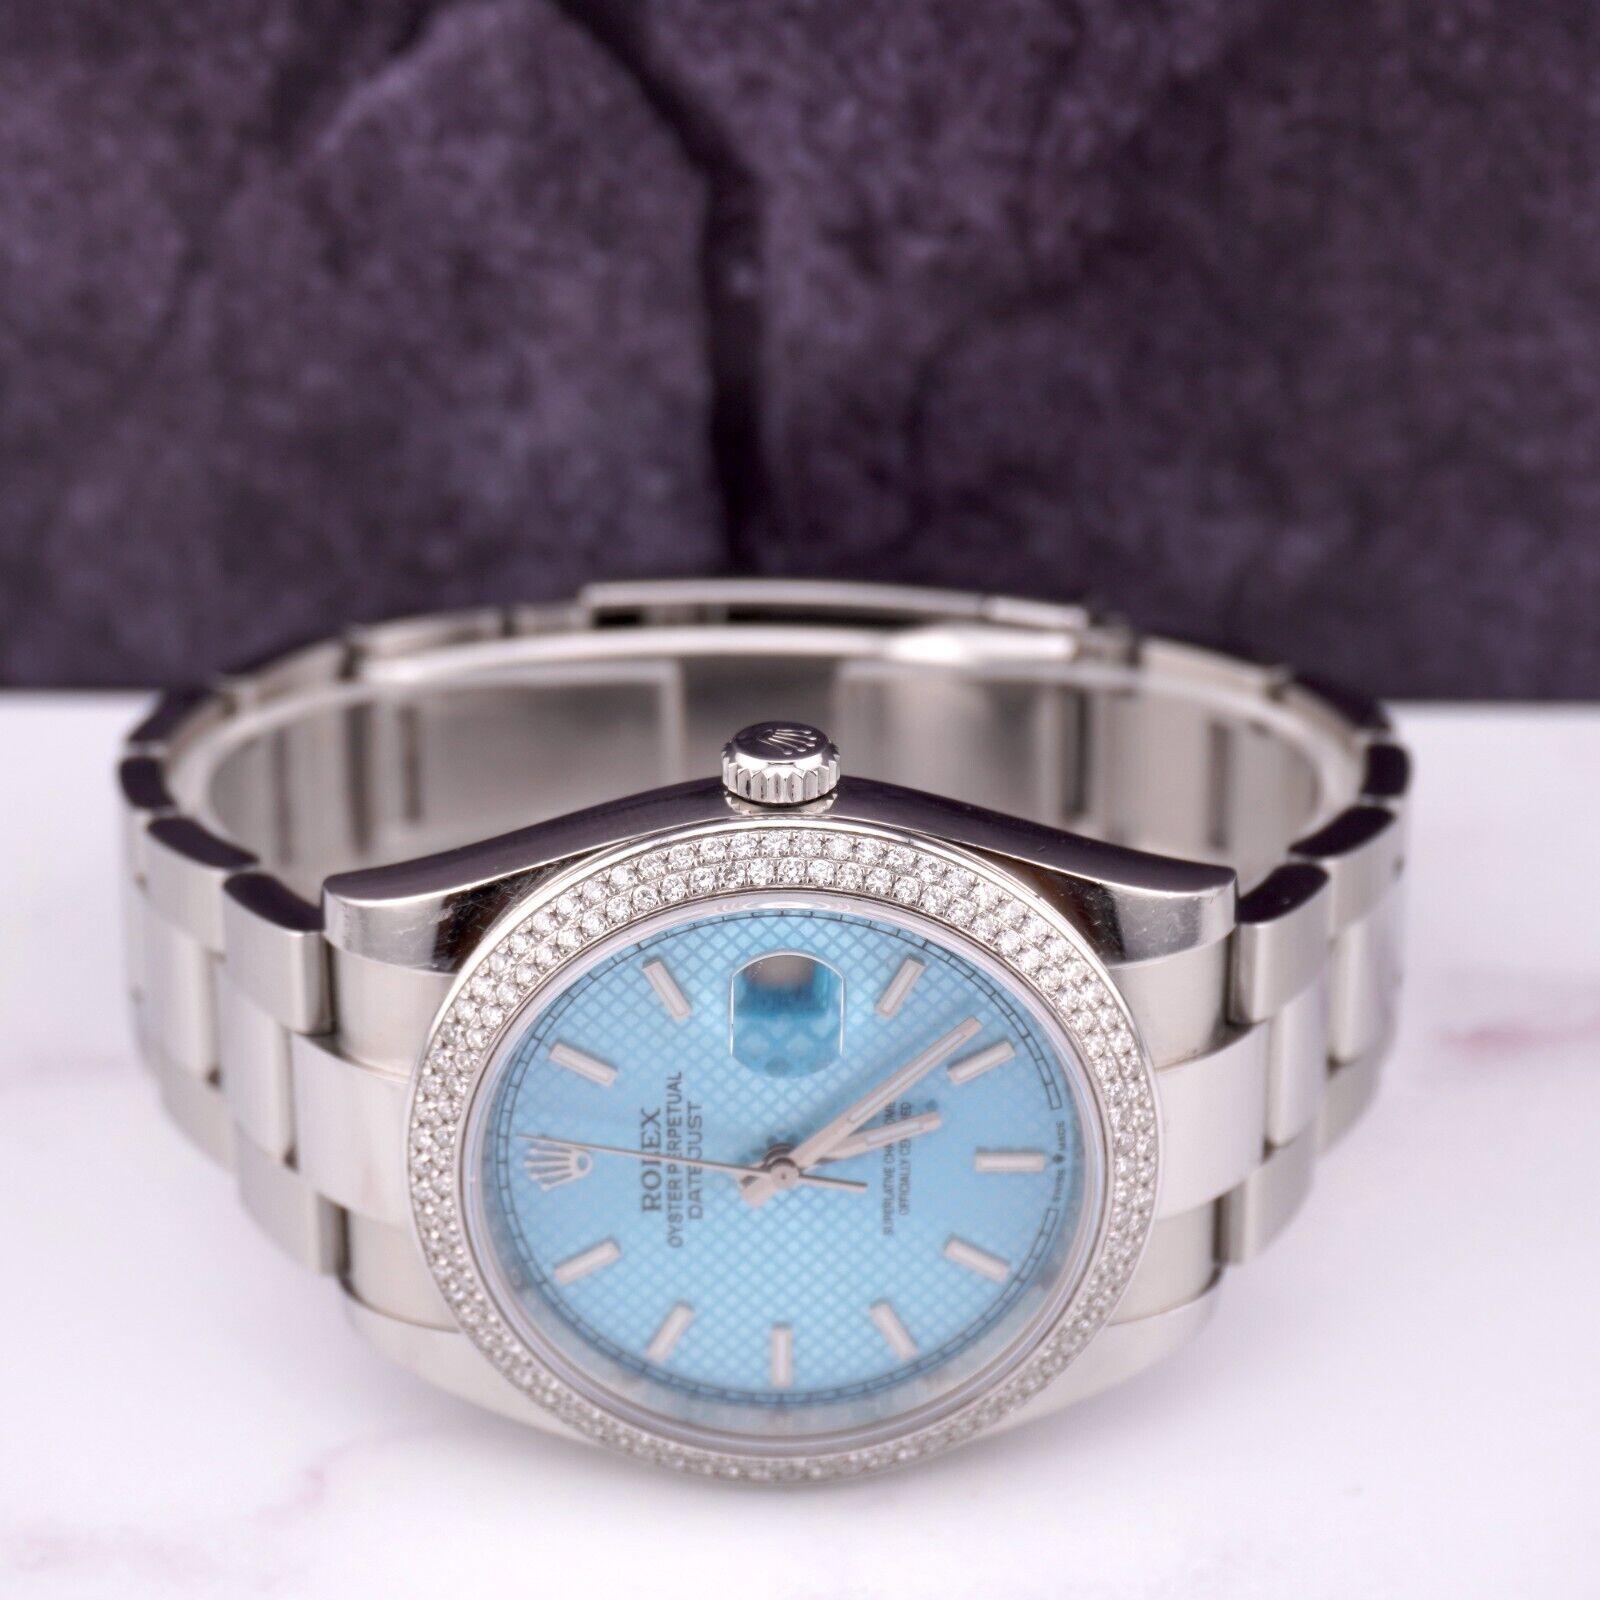 Rolex Men's Datejust 41mm Oyster Steel Watch ICED 2.50ct Diamond ICE Blue Dial For Sale 1